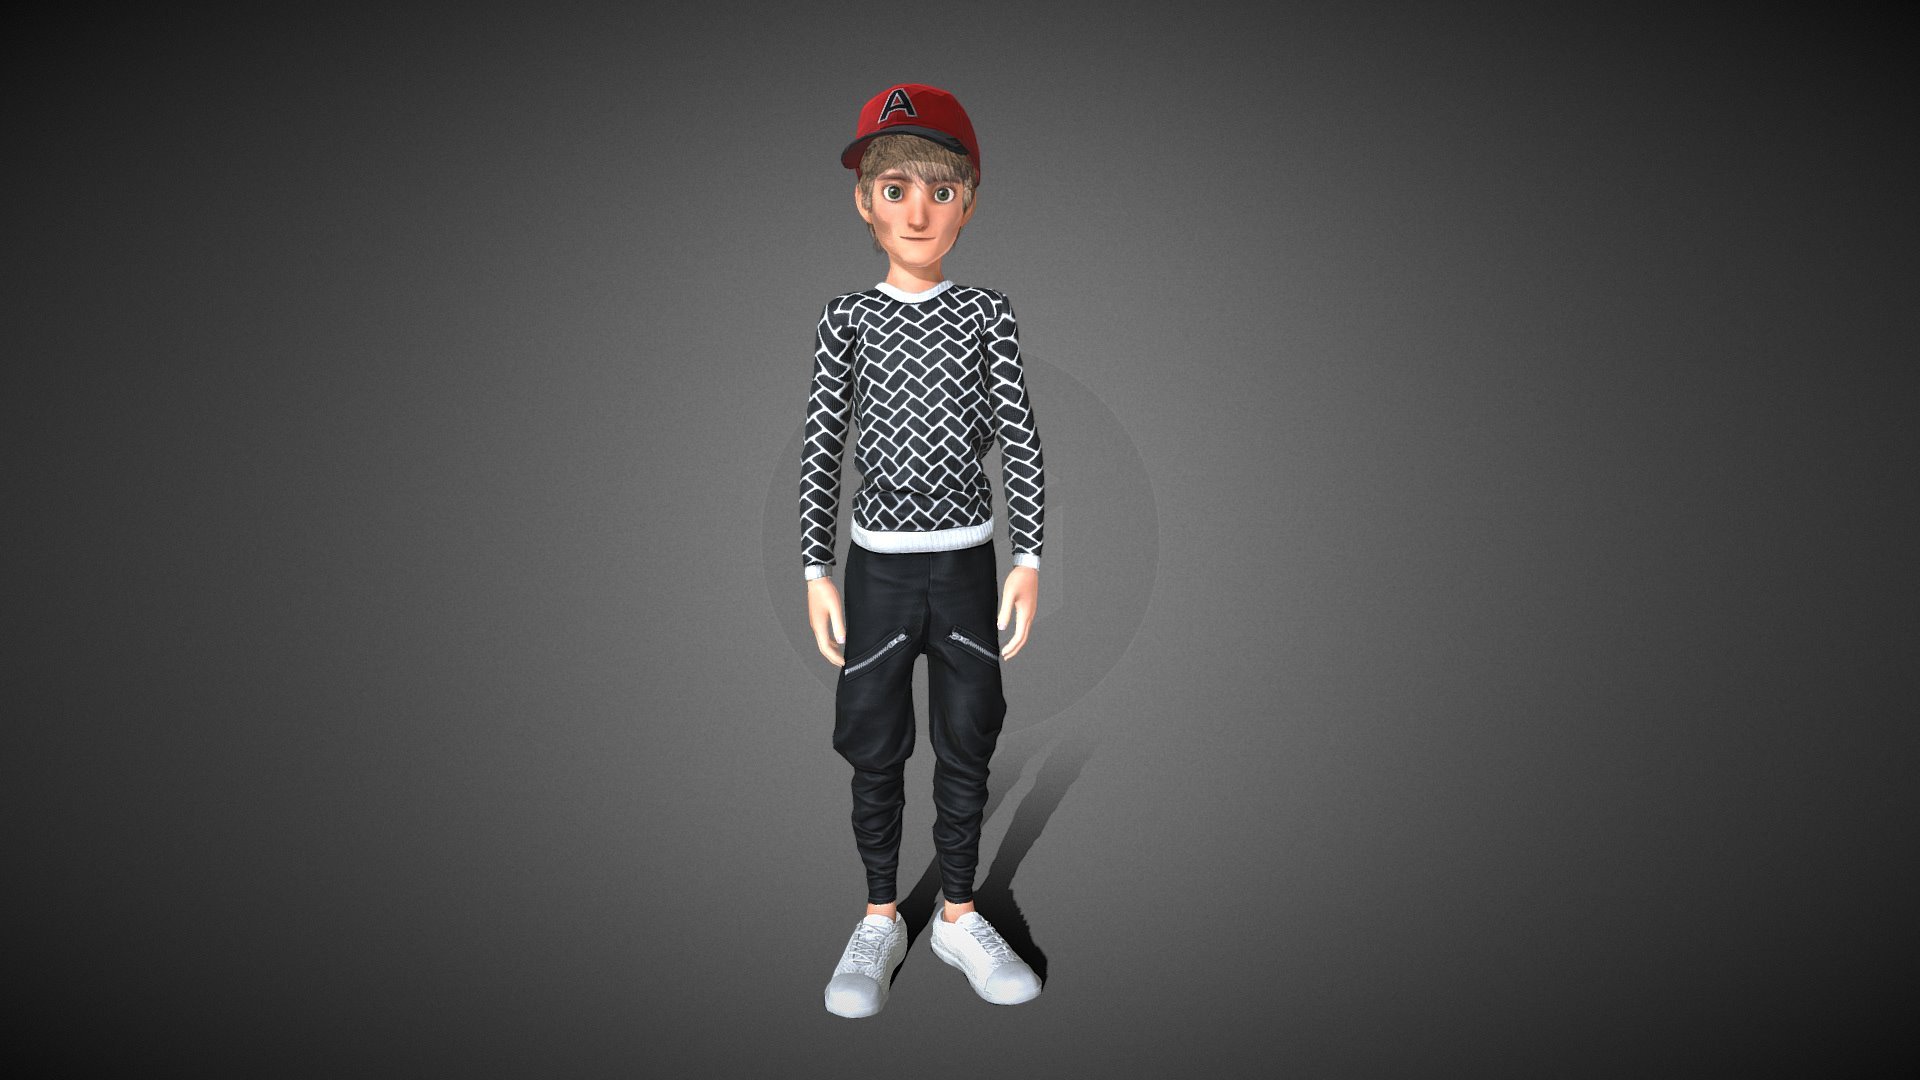 My new CC3 Stylized Base Neutral Morph (wearing Knitwear Vol.1 and other CC cloth assets :)).

Check out all my Character Creator assets here:
https://www.reallusion.com/contentstore/featureddeveloper/profile/#!/ToKoMotion/Character%20Creator - CC3 Stylized Base Neutral Morph - 3D model by tokomotion 3d model